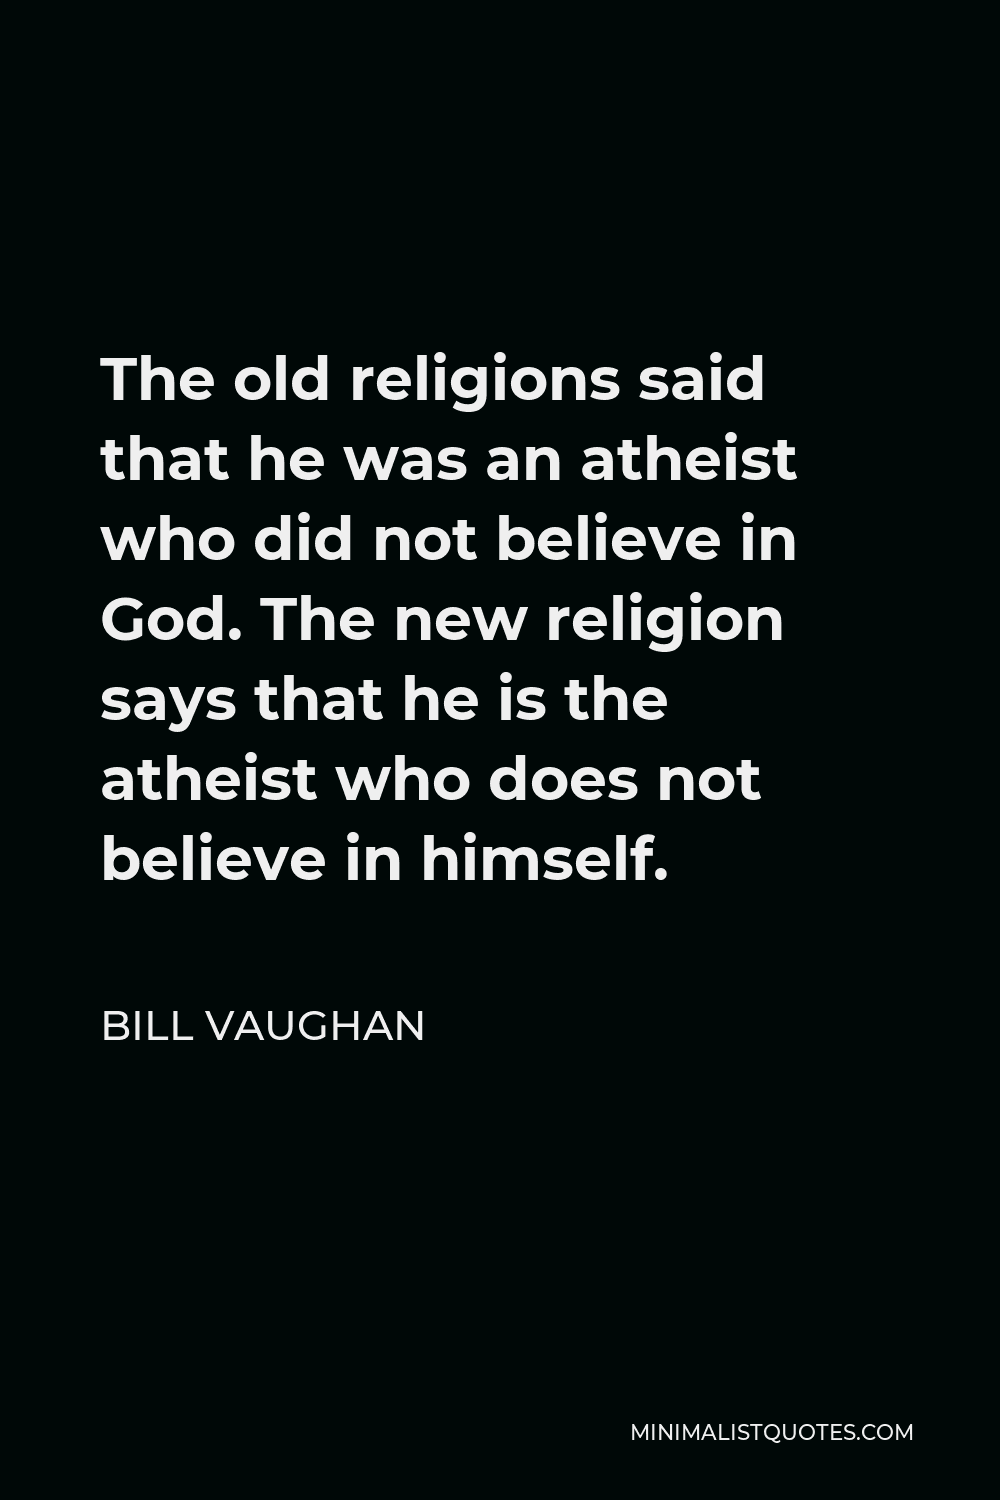 Bill Vaughan Quote - The old religions said that he was an atheist who did not believe in God. The new religion says that he is the atheist who does not believe in himself.